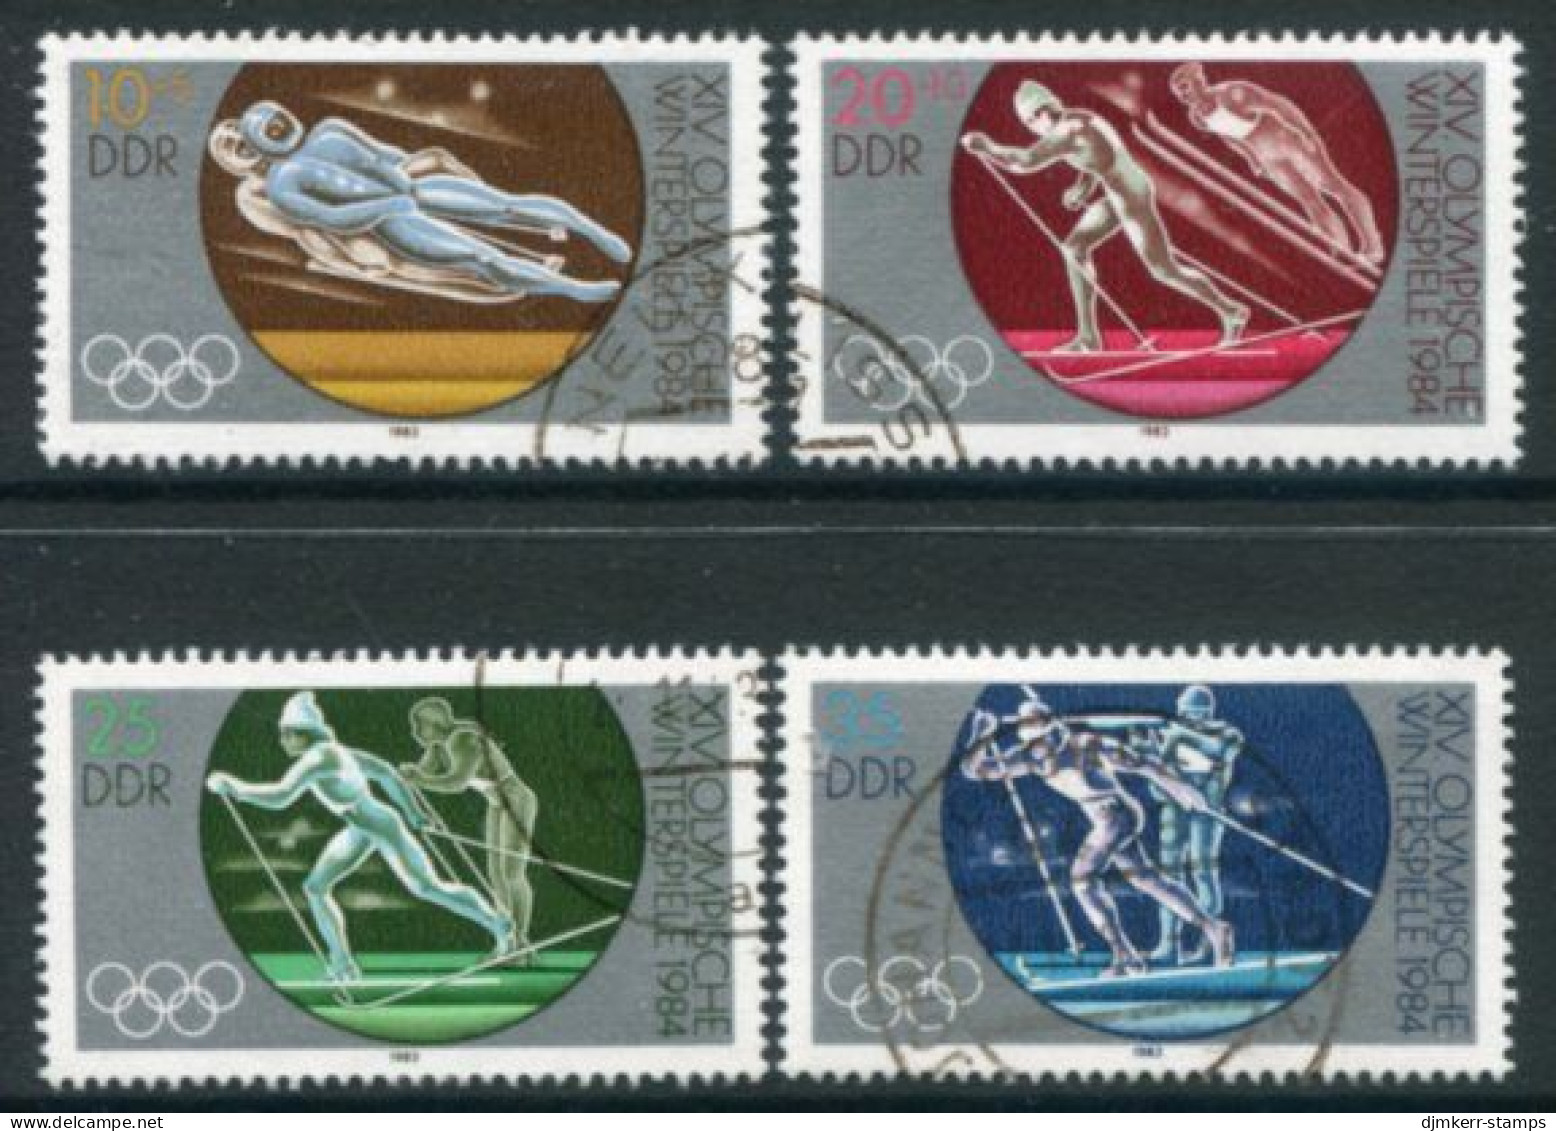 DDR 1983 Winter Olympic Games Used.  Michel 2839-42 - Used Stamps